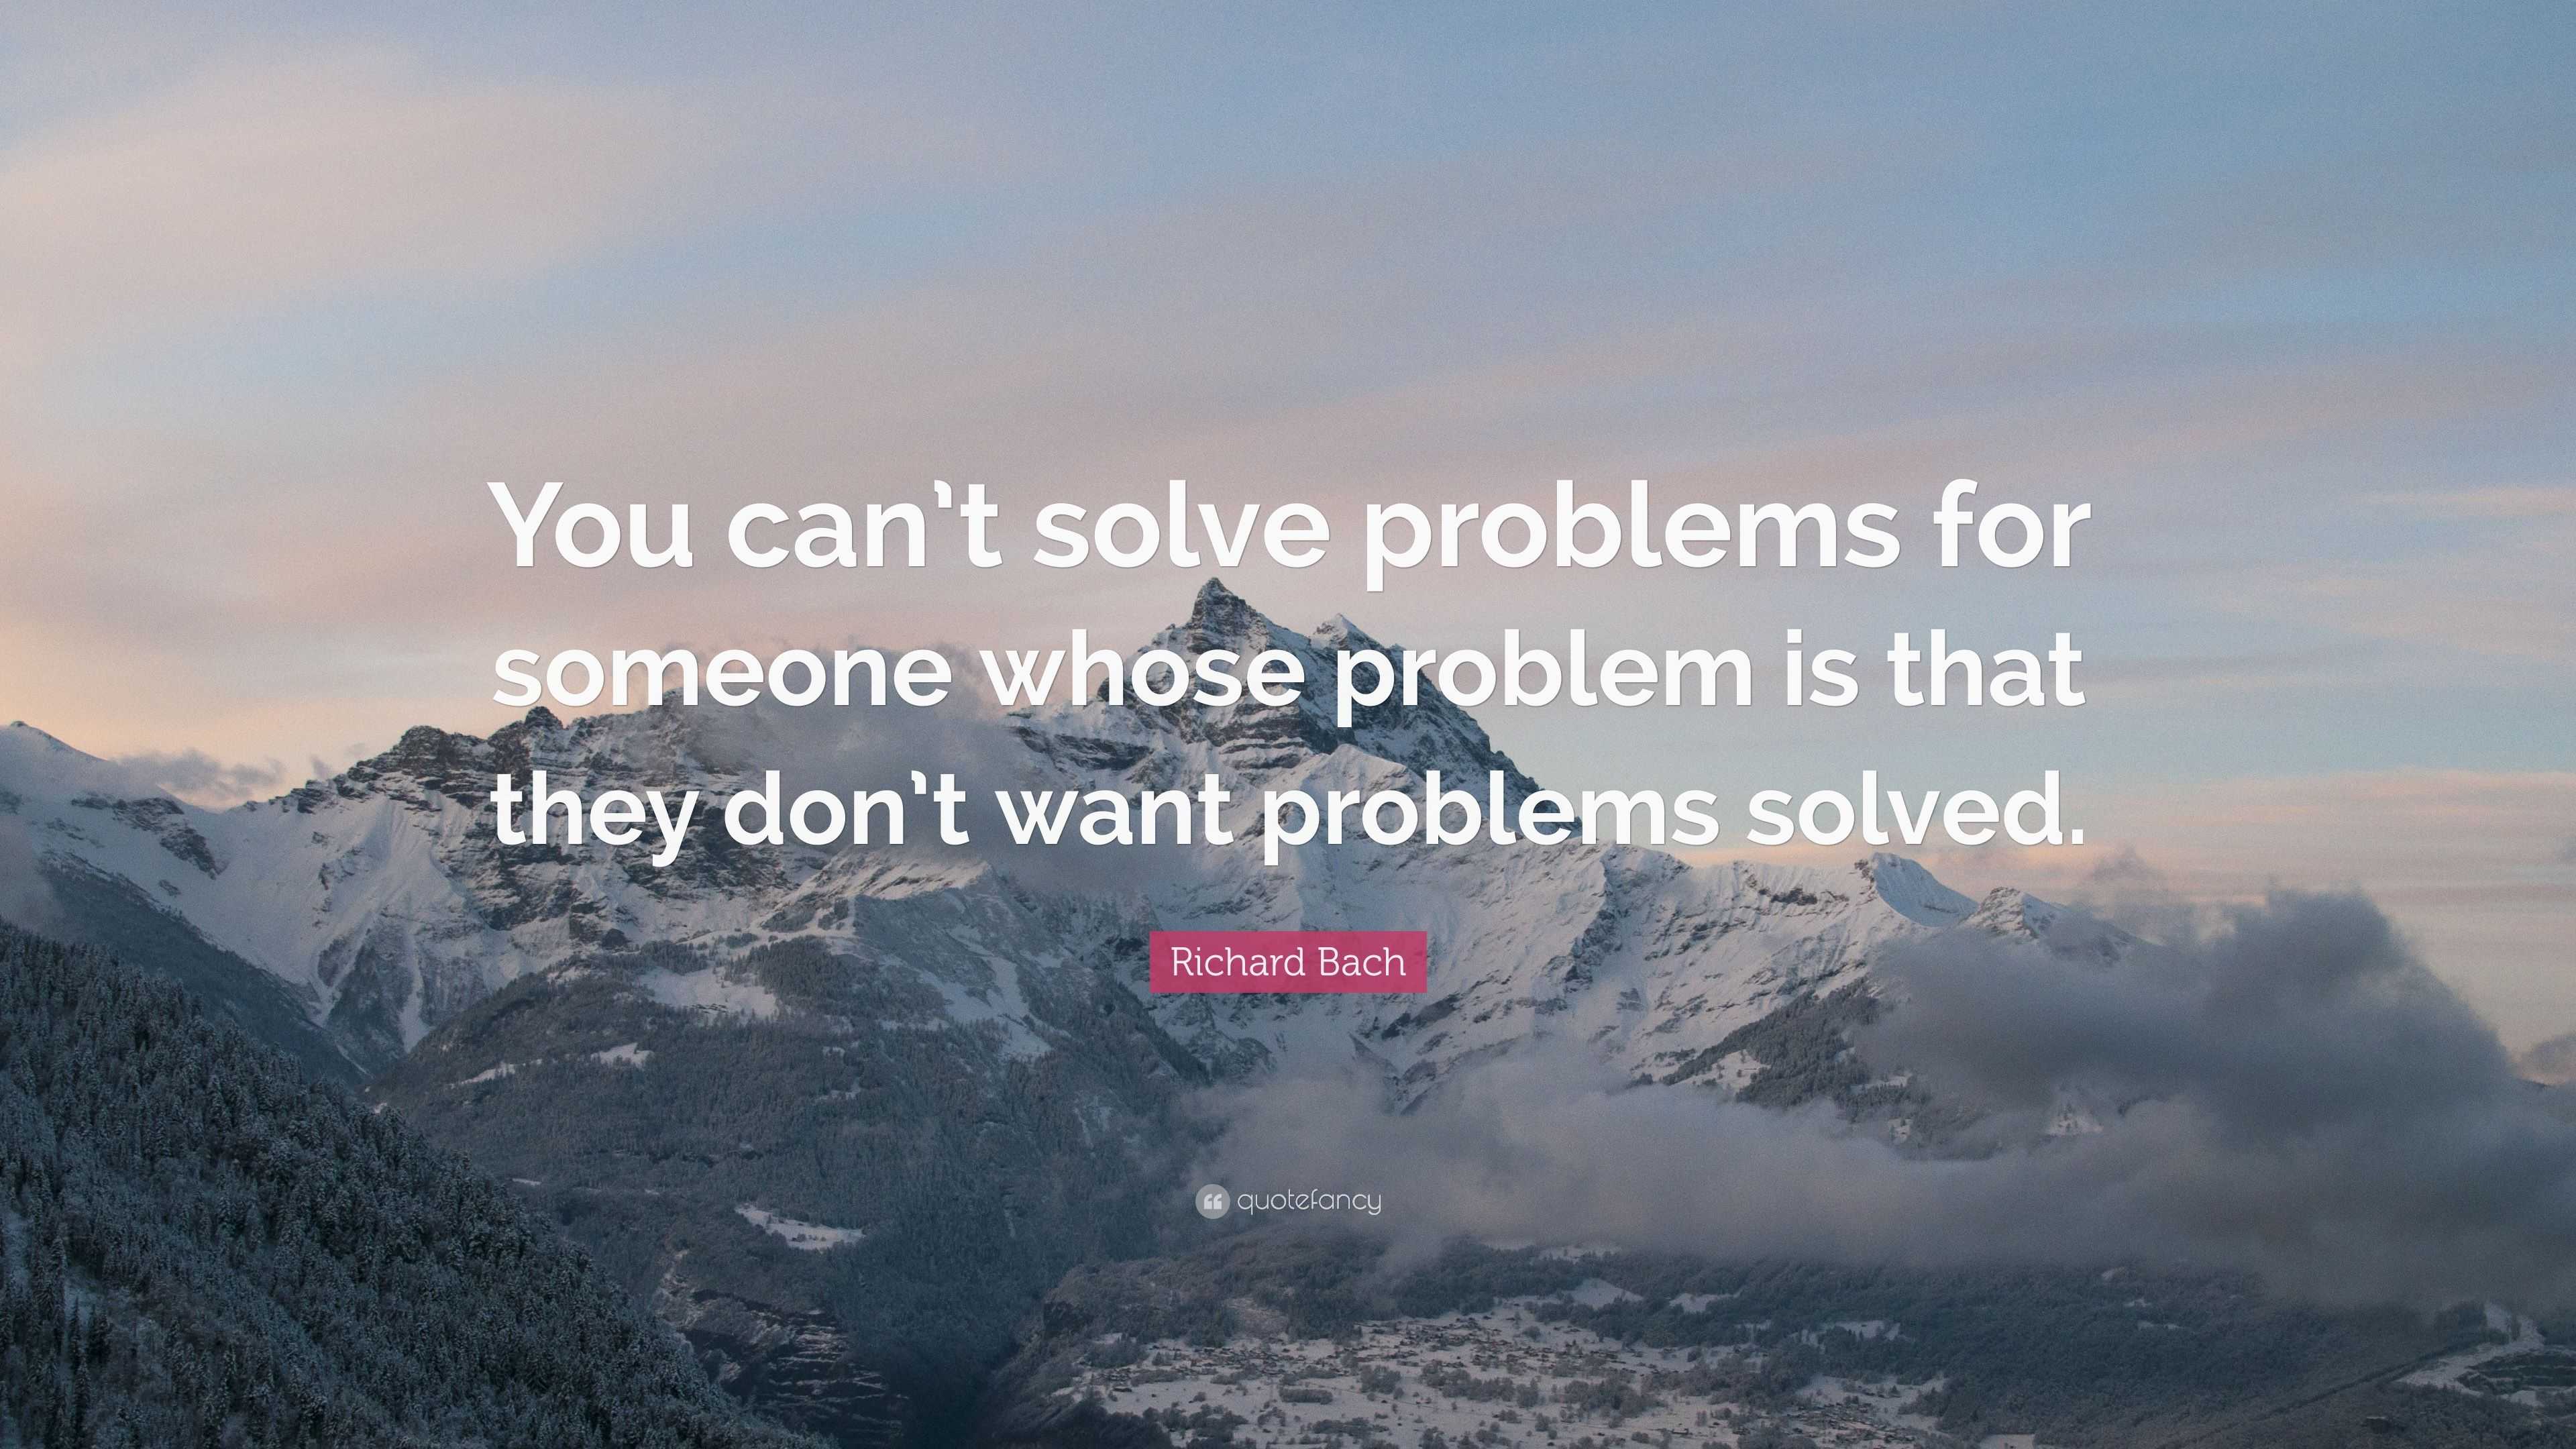 Richard Bach Quote: “You can’t solve problems for someone whose problem ...